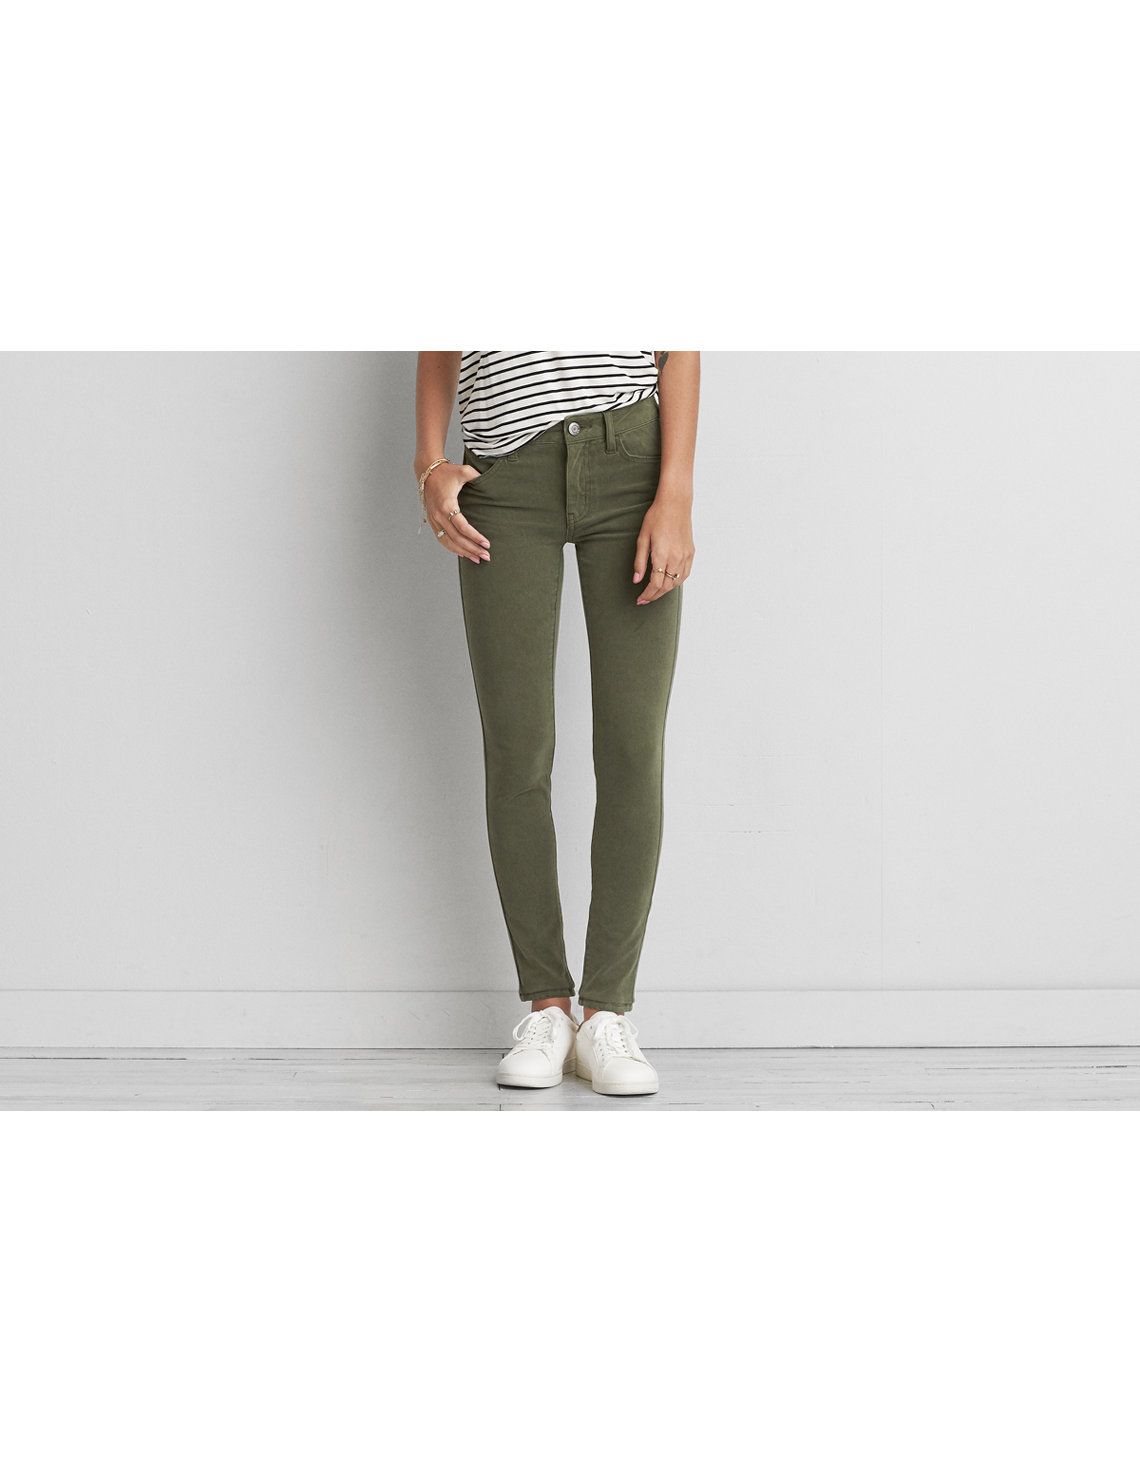 AEO Denim X4 Jegging, Olive | American Eagle Outfitters (US & CA)